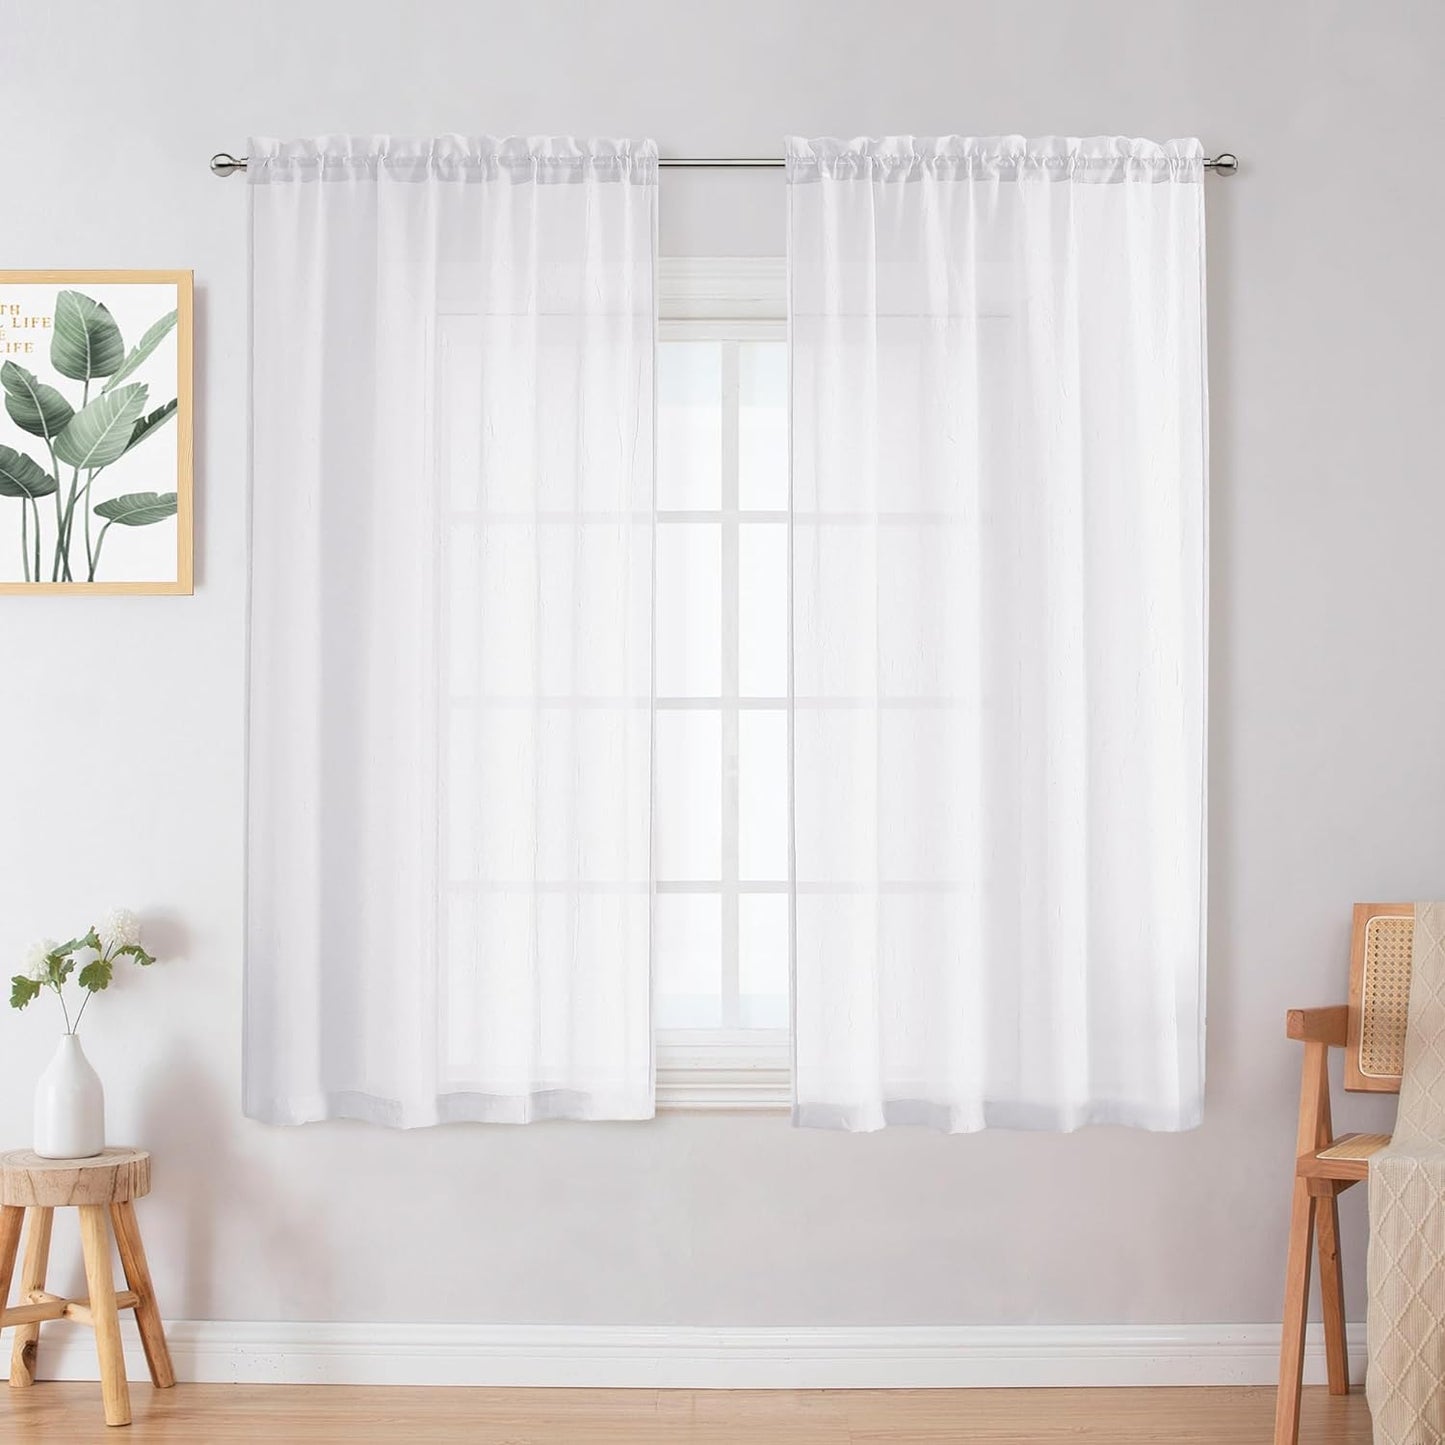 Crushed Sheer White Curtains 63 Inch Length 2 Panels, Light Filtering Solid Crinkle Voile Short Sheer Curtian for Bedroom Living Room, Each 42Wx63L Inches  Chyhomenyc White 28 W X 54 L 